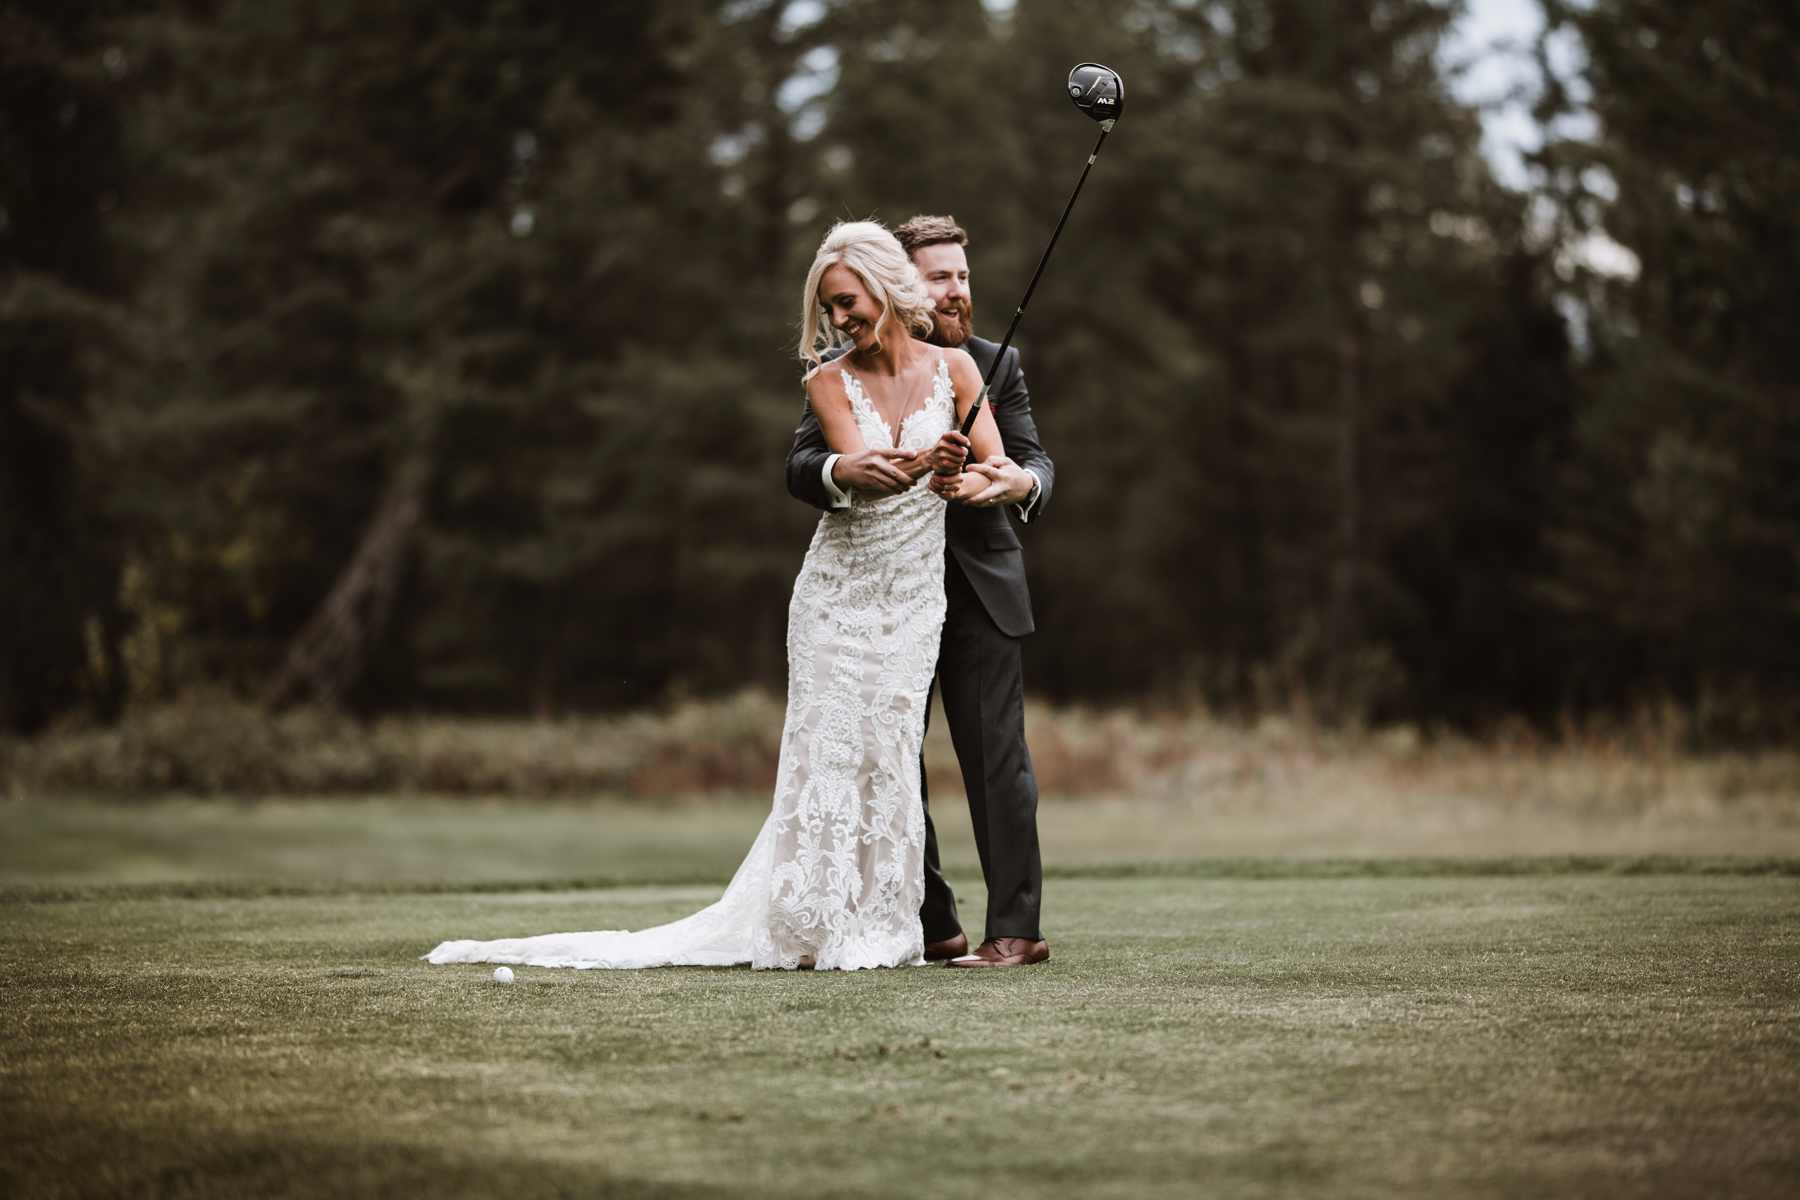 Calgary wedding photographer in Invermere for adventurous mountain destination elopement at Eagle Ranch Golf Resort, British Columbia - Image 32